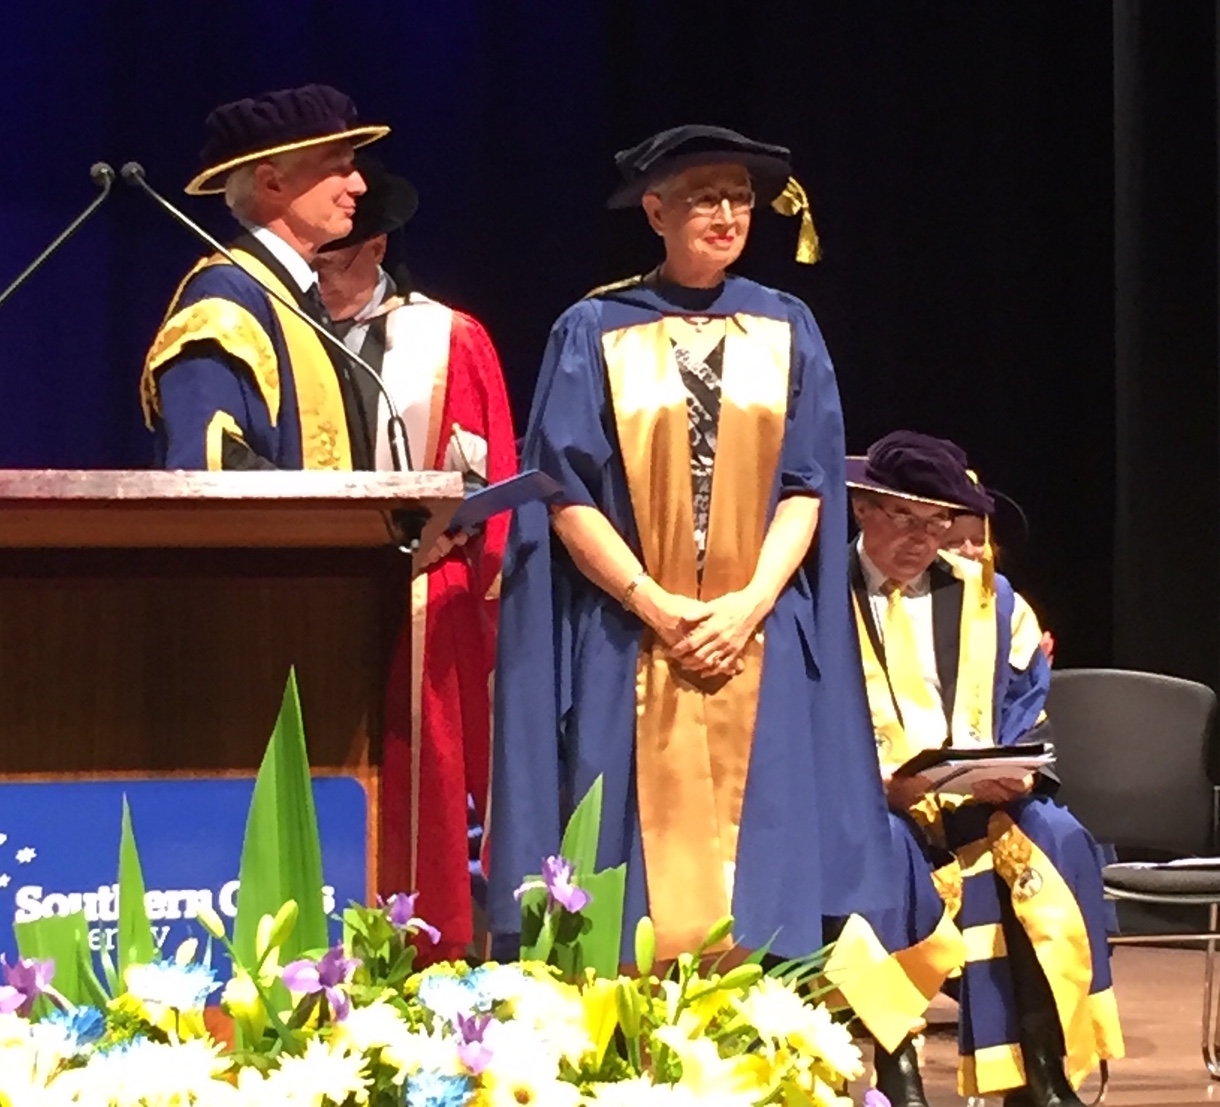 Accepting an Honorary Doctorate at Southern Cross University.